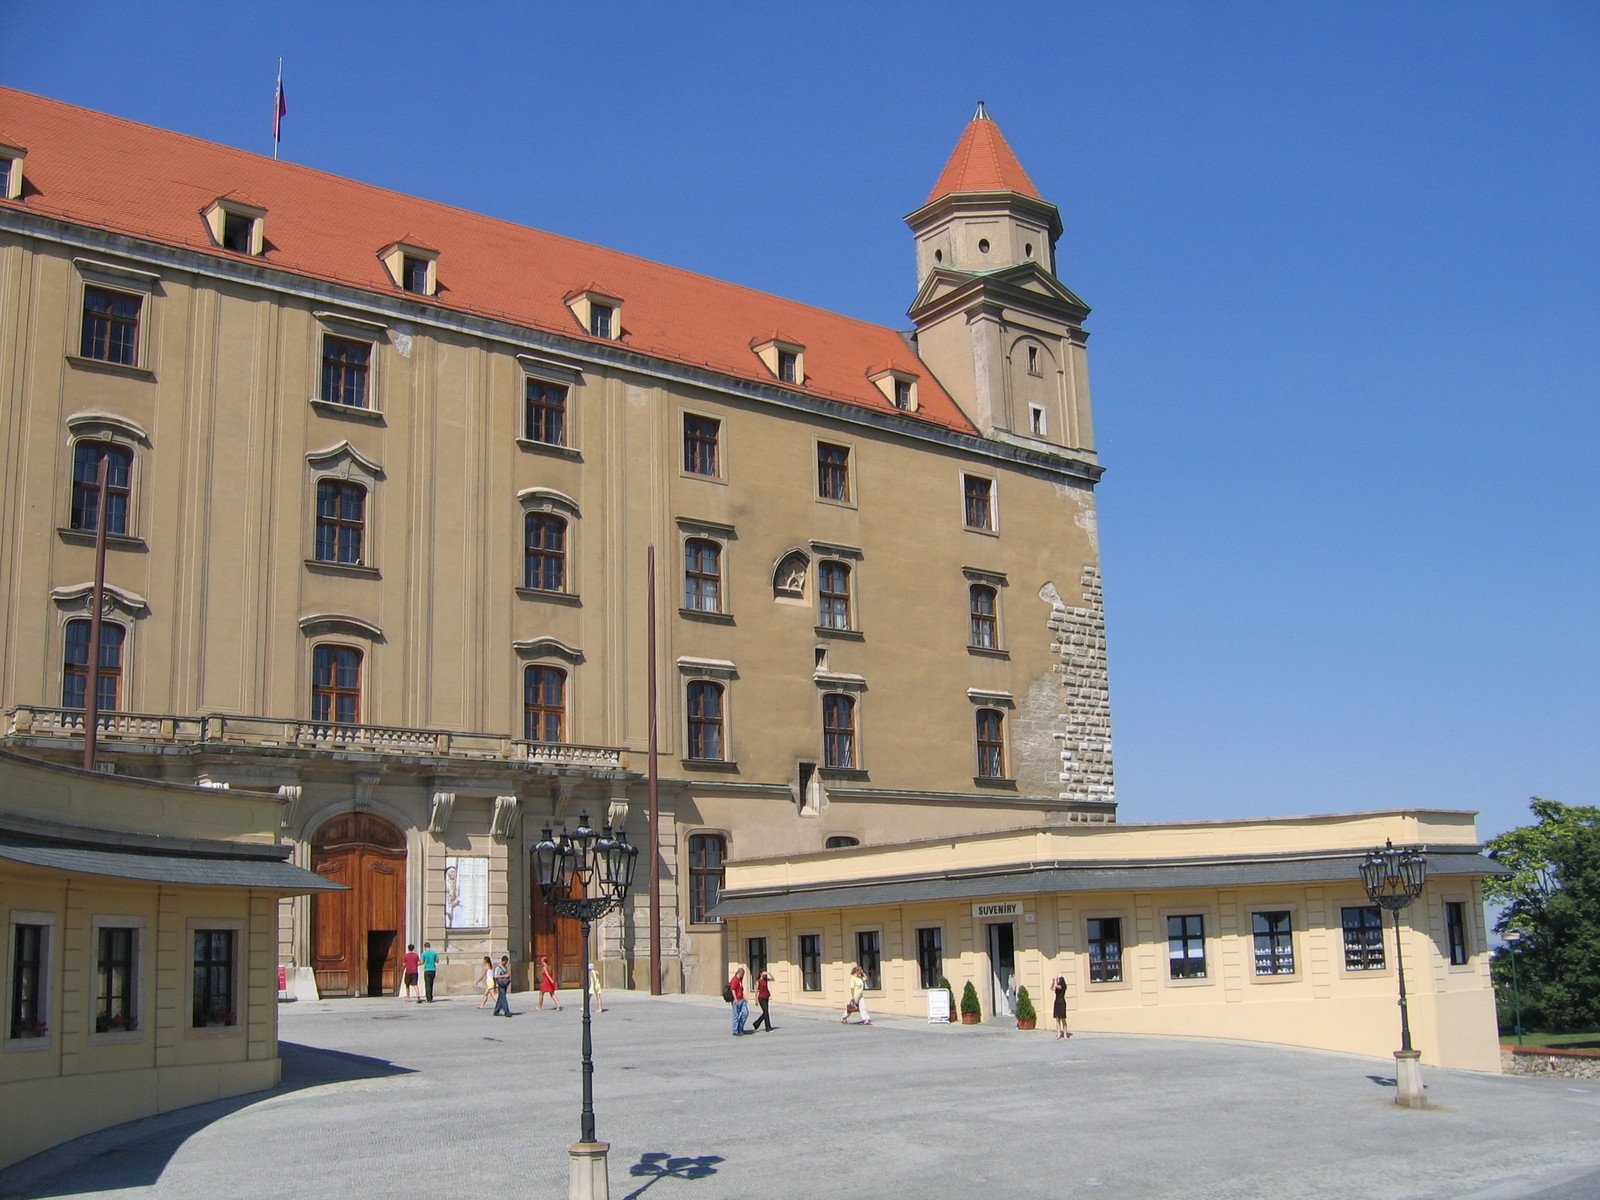 a large brown building with a clock tower on the roof